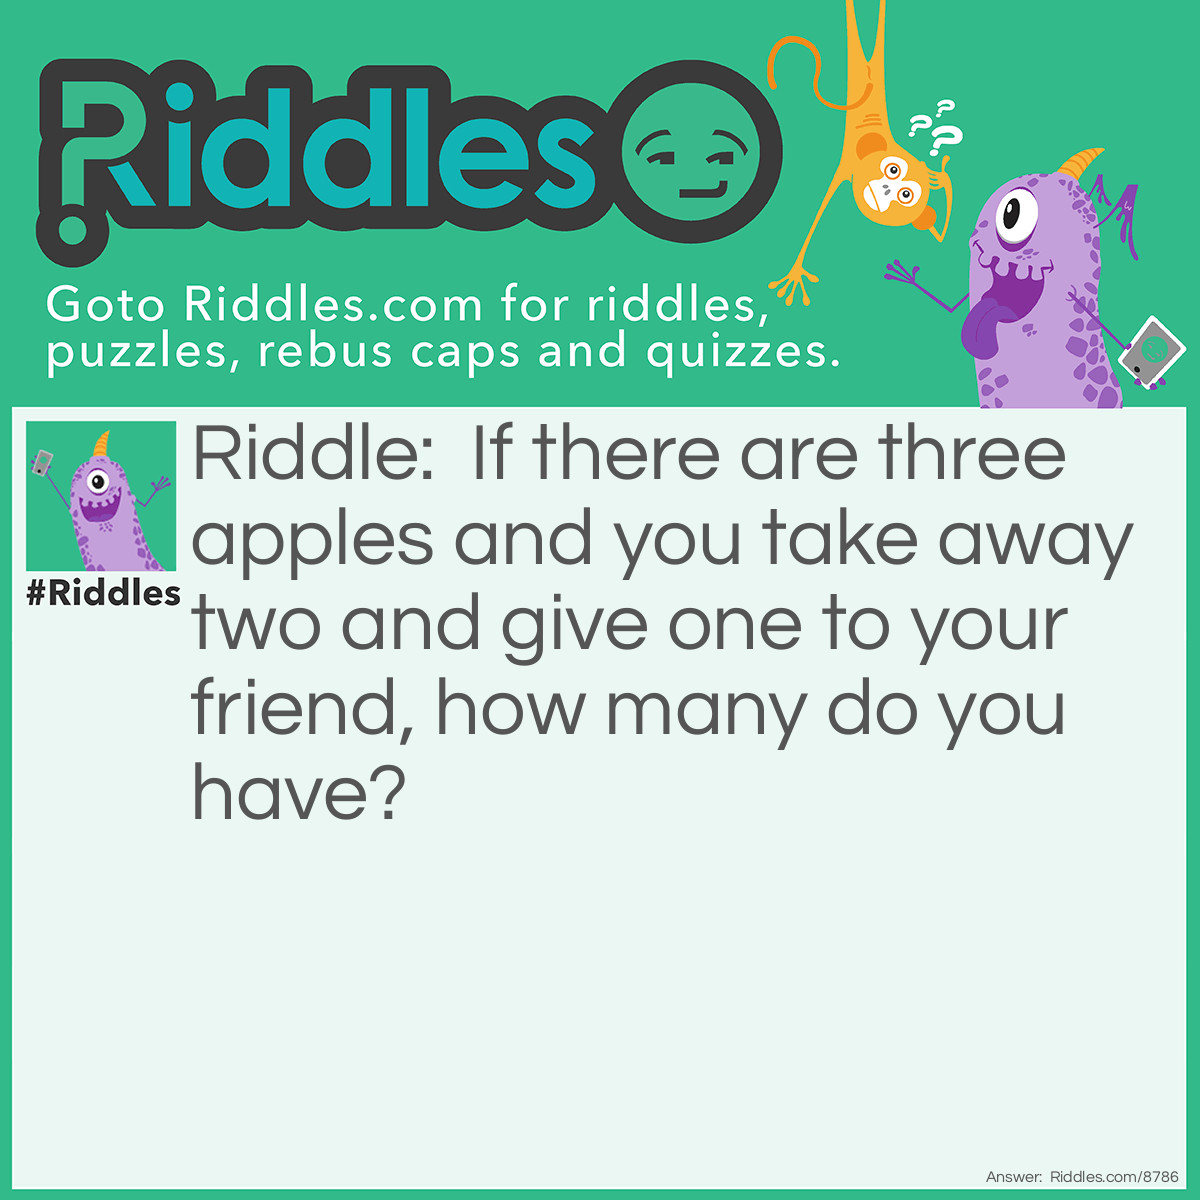 Riddle: If there are three apples and you take away two and give one to your friend, how many do you have? Answer: 1!!!!!!!!